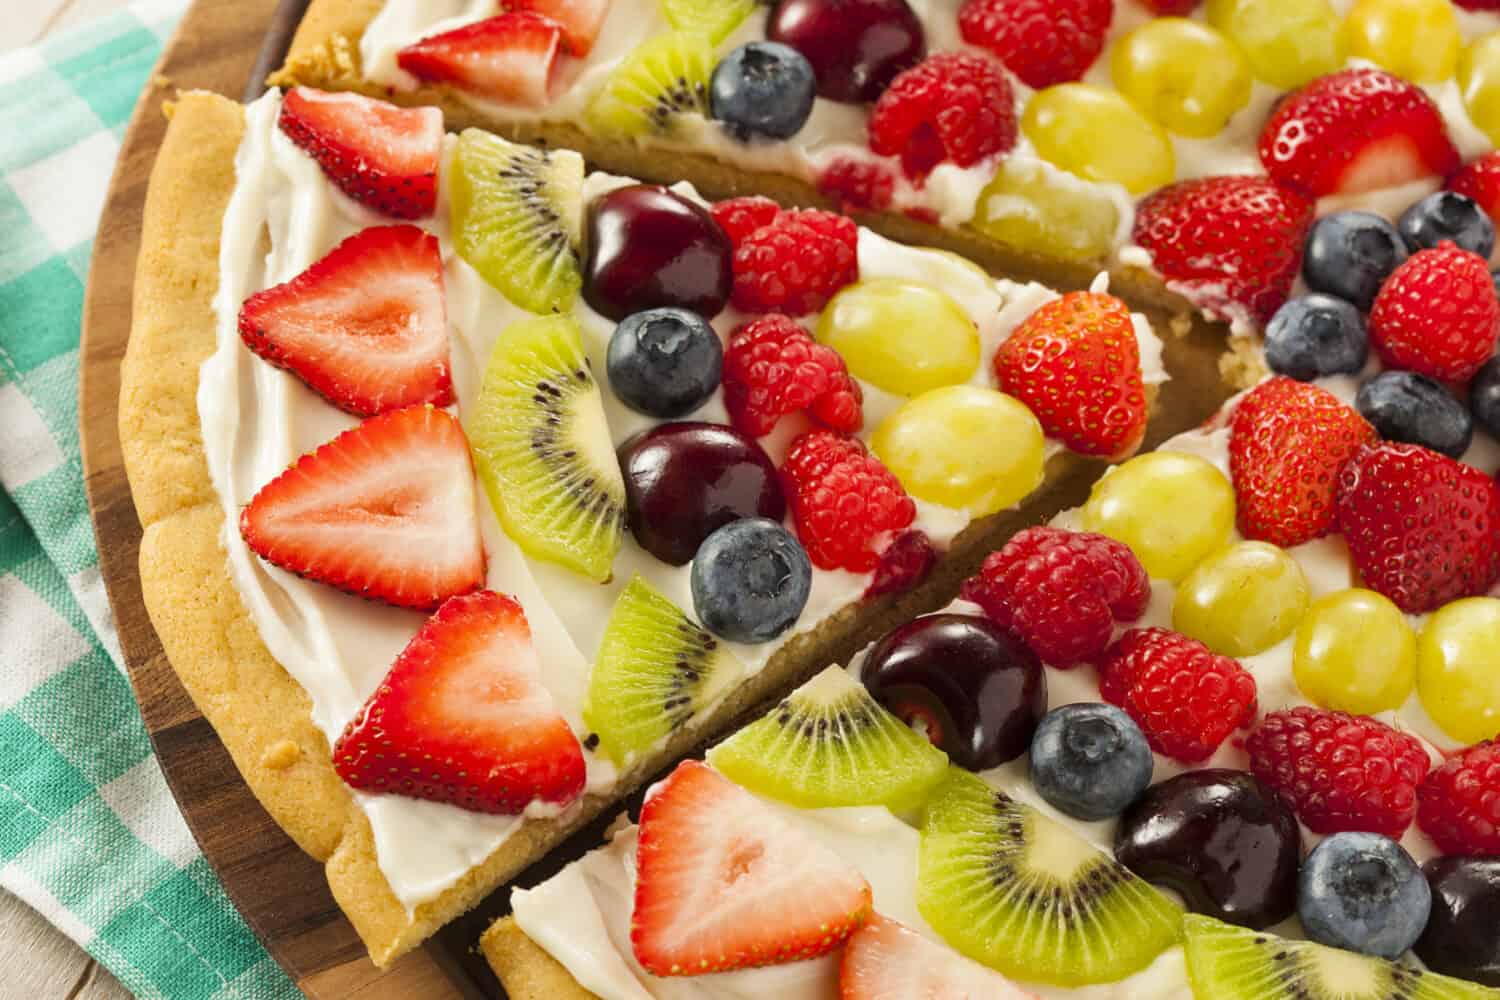 Homemade Natural Fruit Pizza with Frosting and Berries